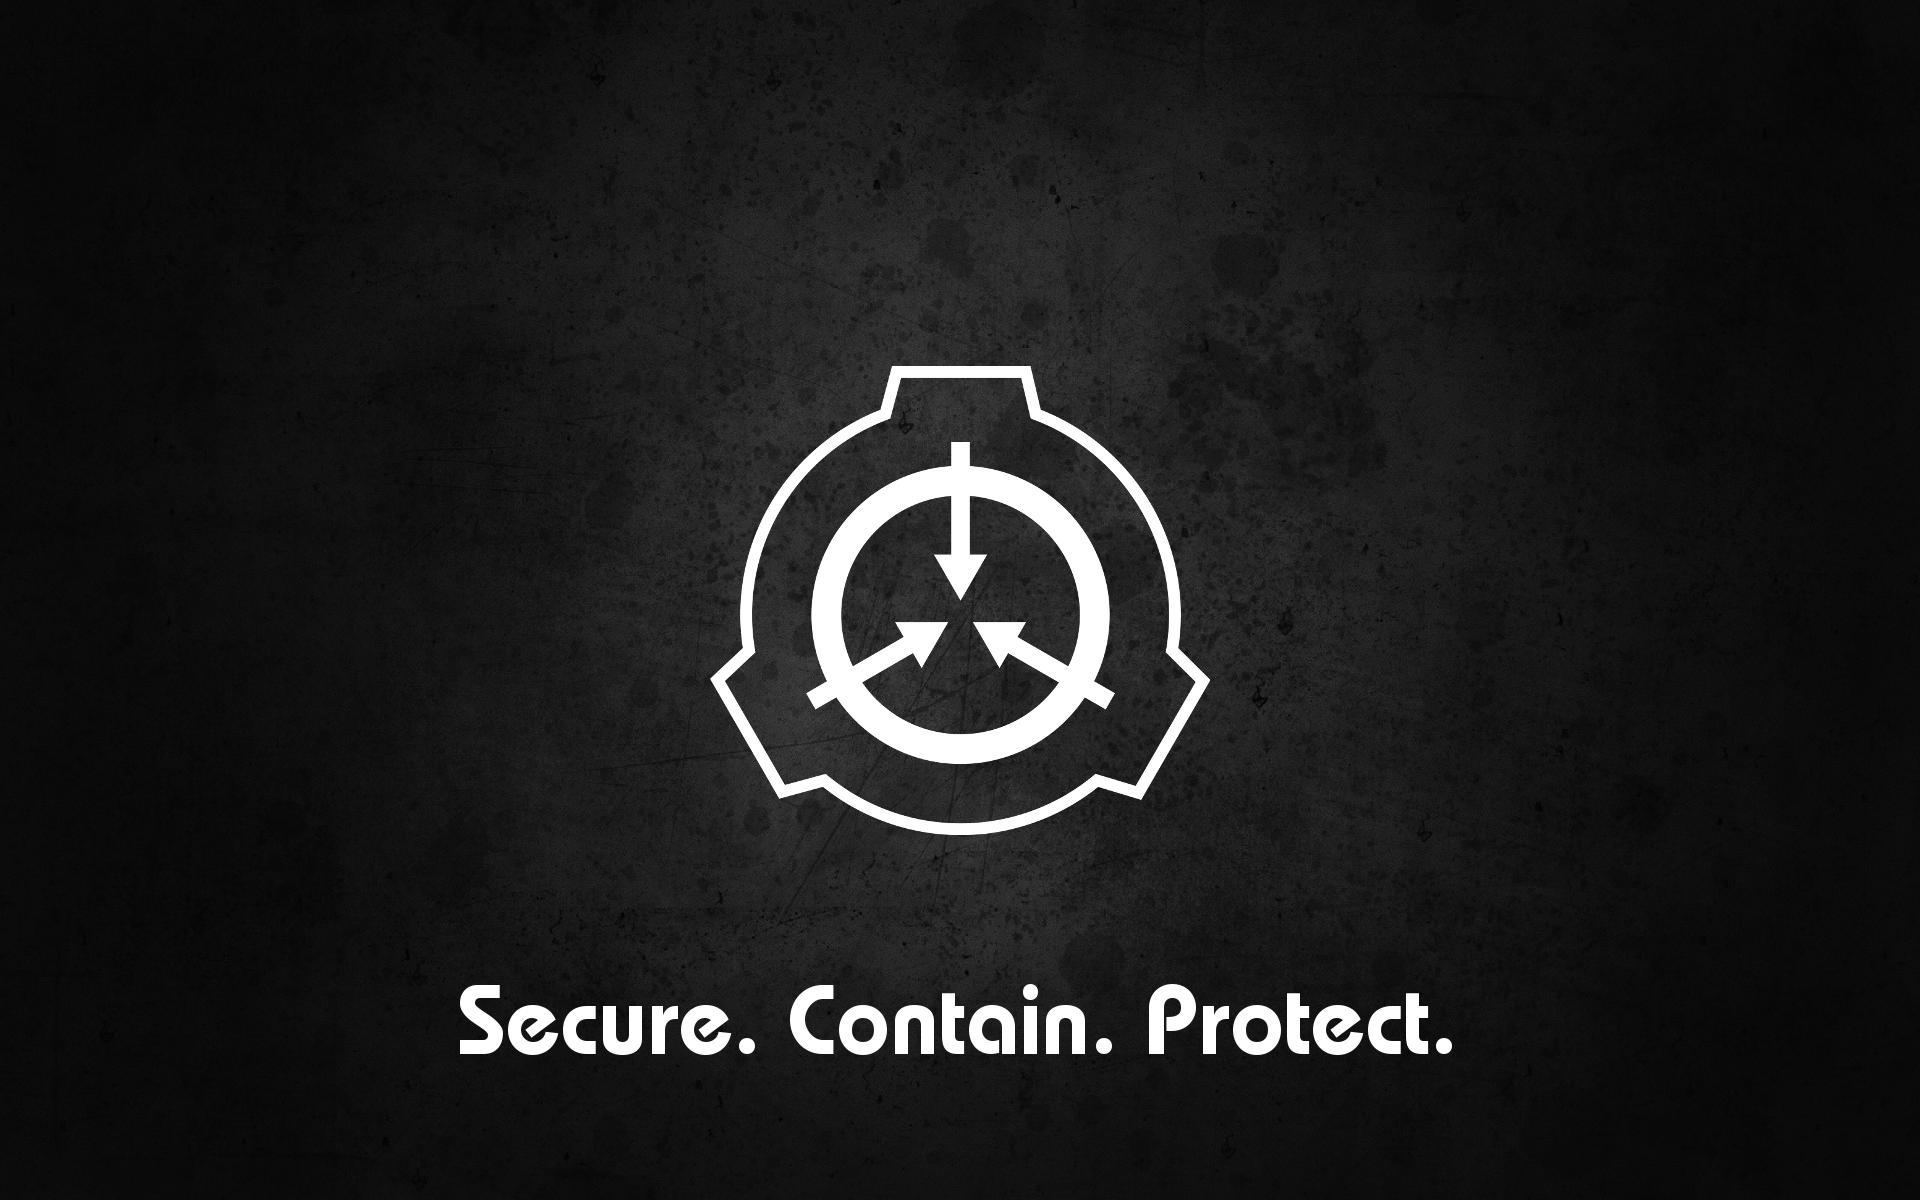 Scp 173 Wallpapers Top Free Scp 173 Backgrounds Wallpaperaccess